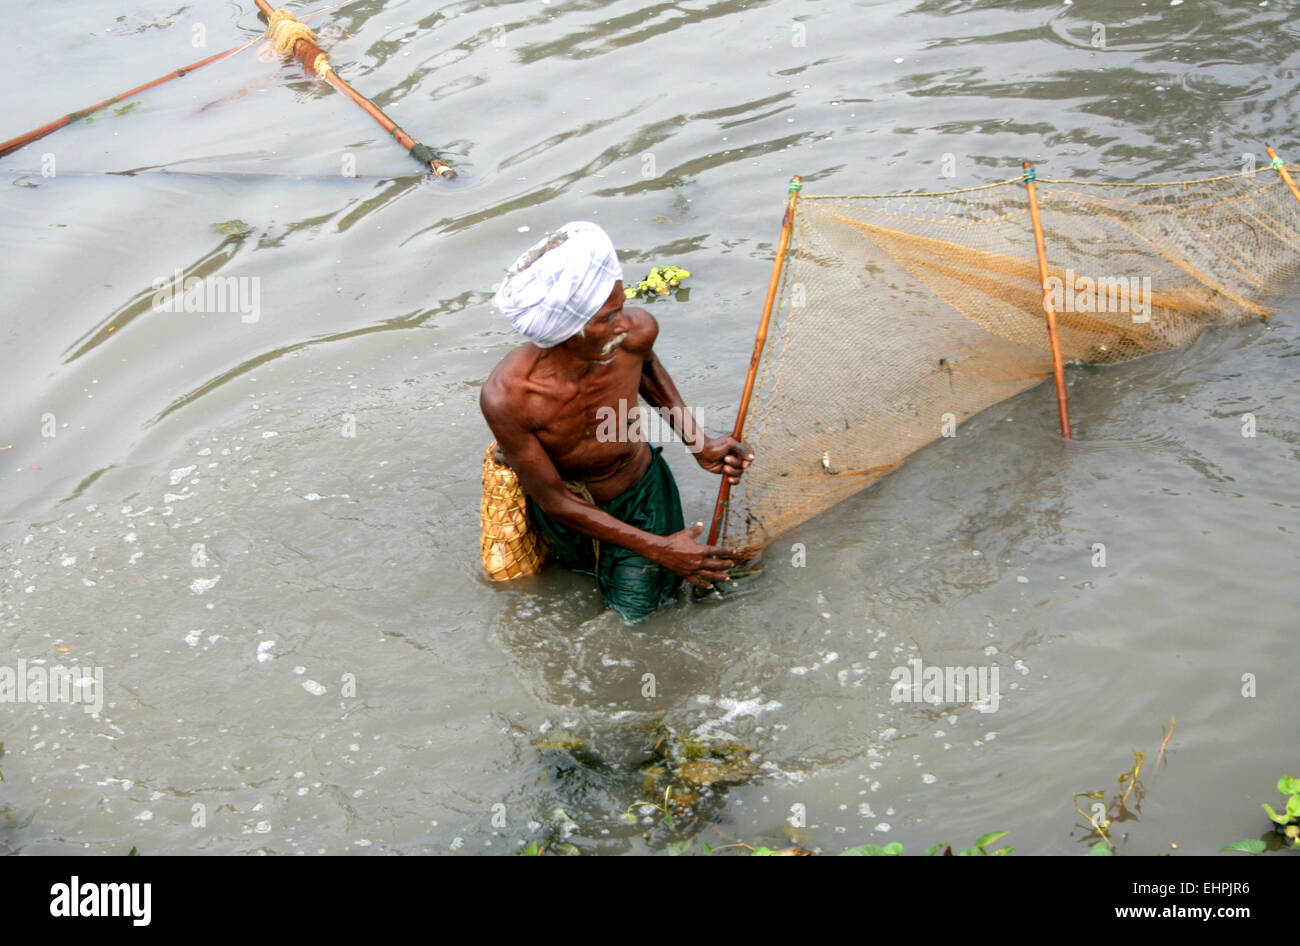 fisherman spread the net in a traditional way to catch fish in irrigation  canal water on February 15,2012 in Nandivada,AP,India Stock Photo - Alamy